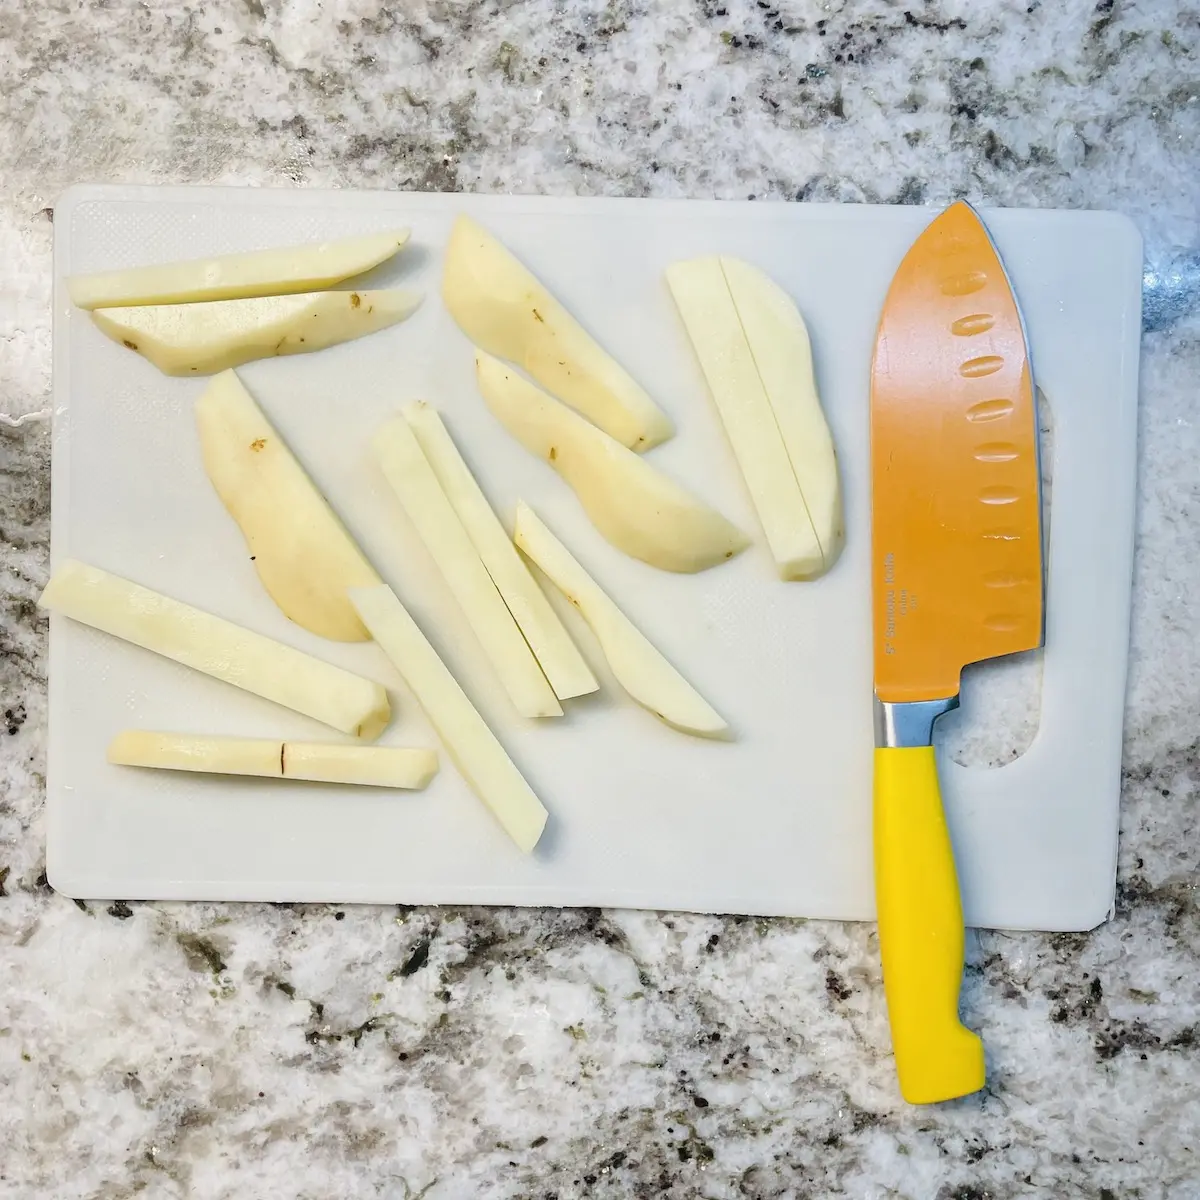 Oven French Fries Step 1 Cutting Board